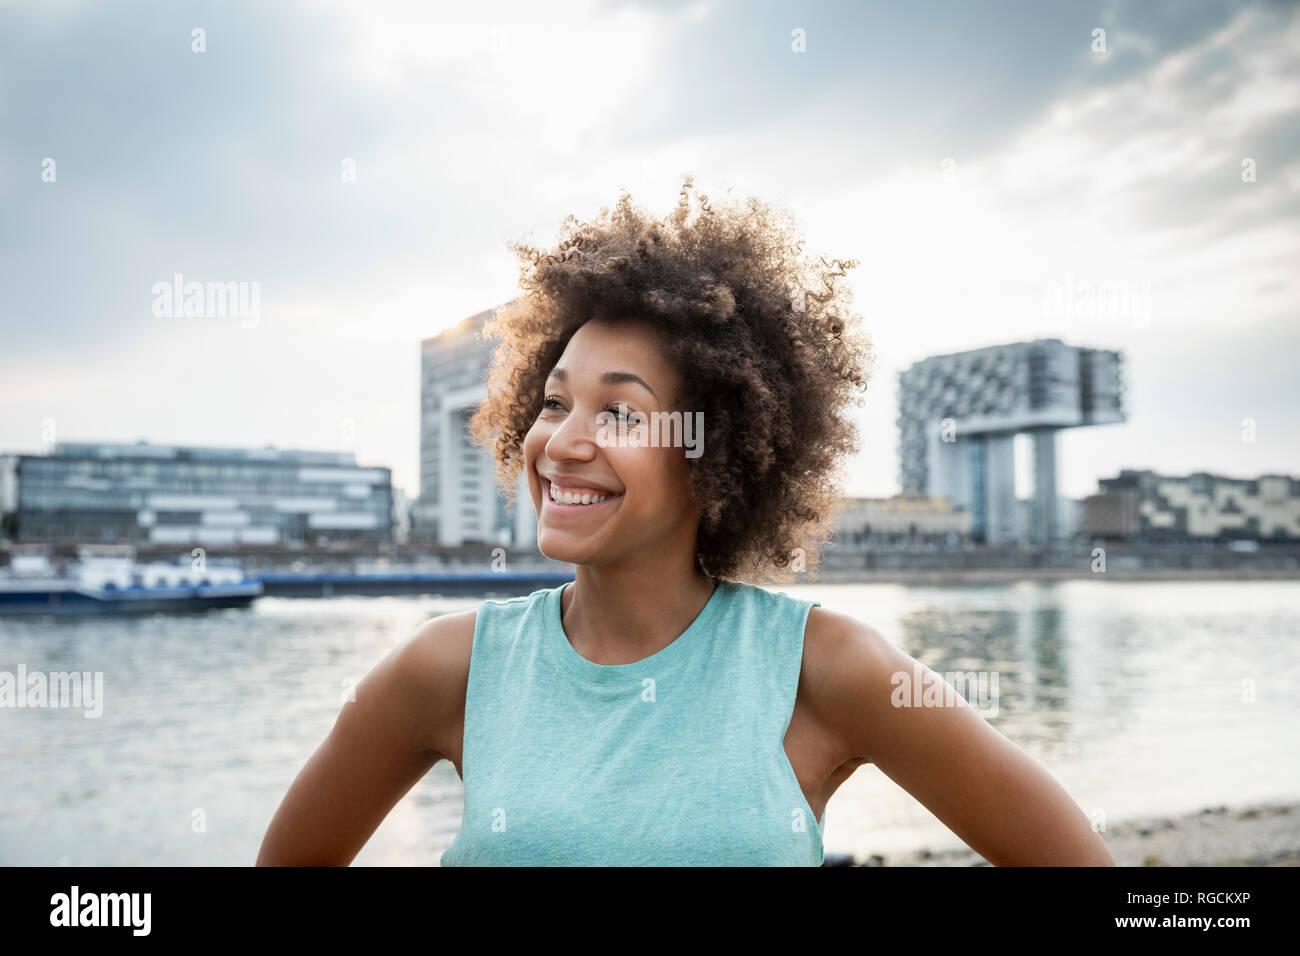 Germany, Cologne, portrait of happy woman at River Rhine Stock Photo